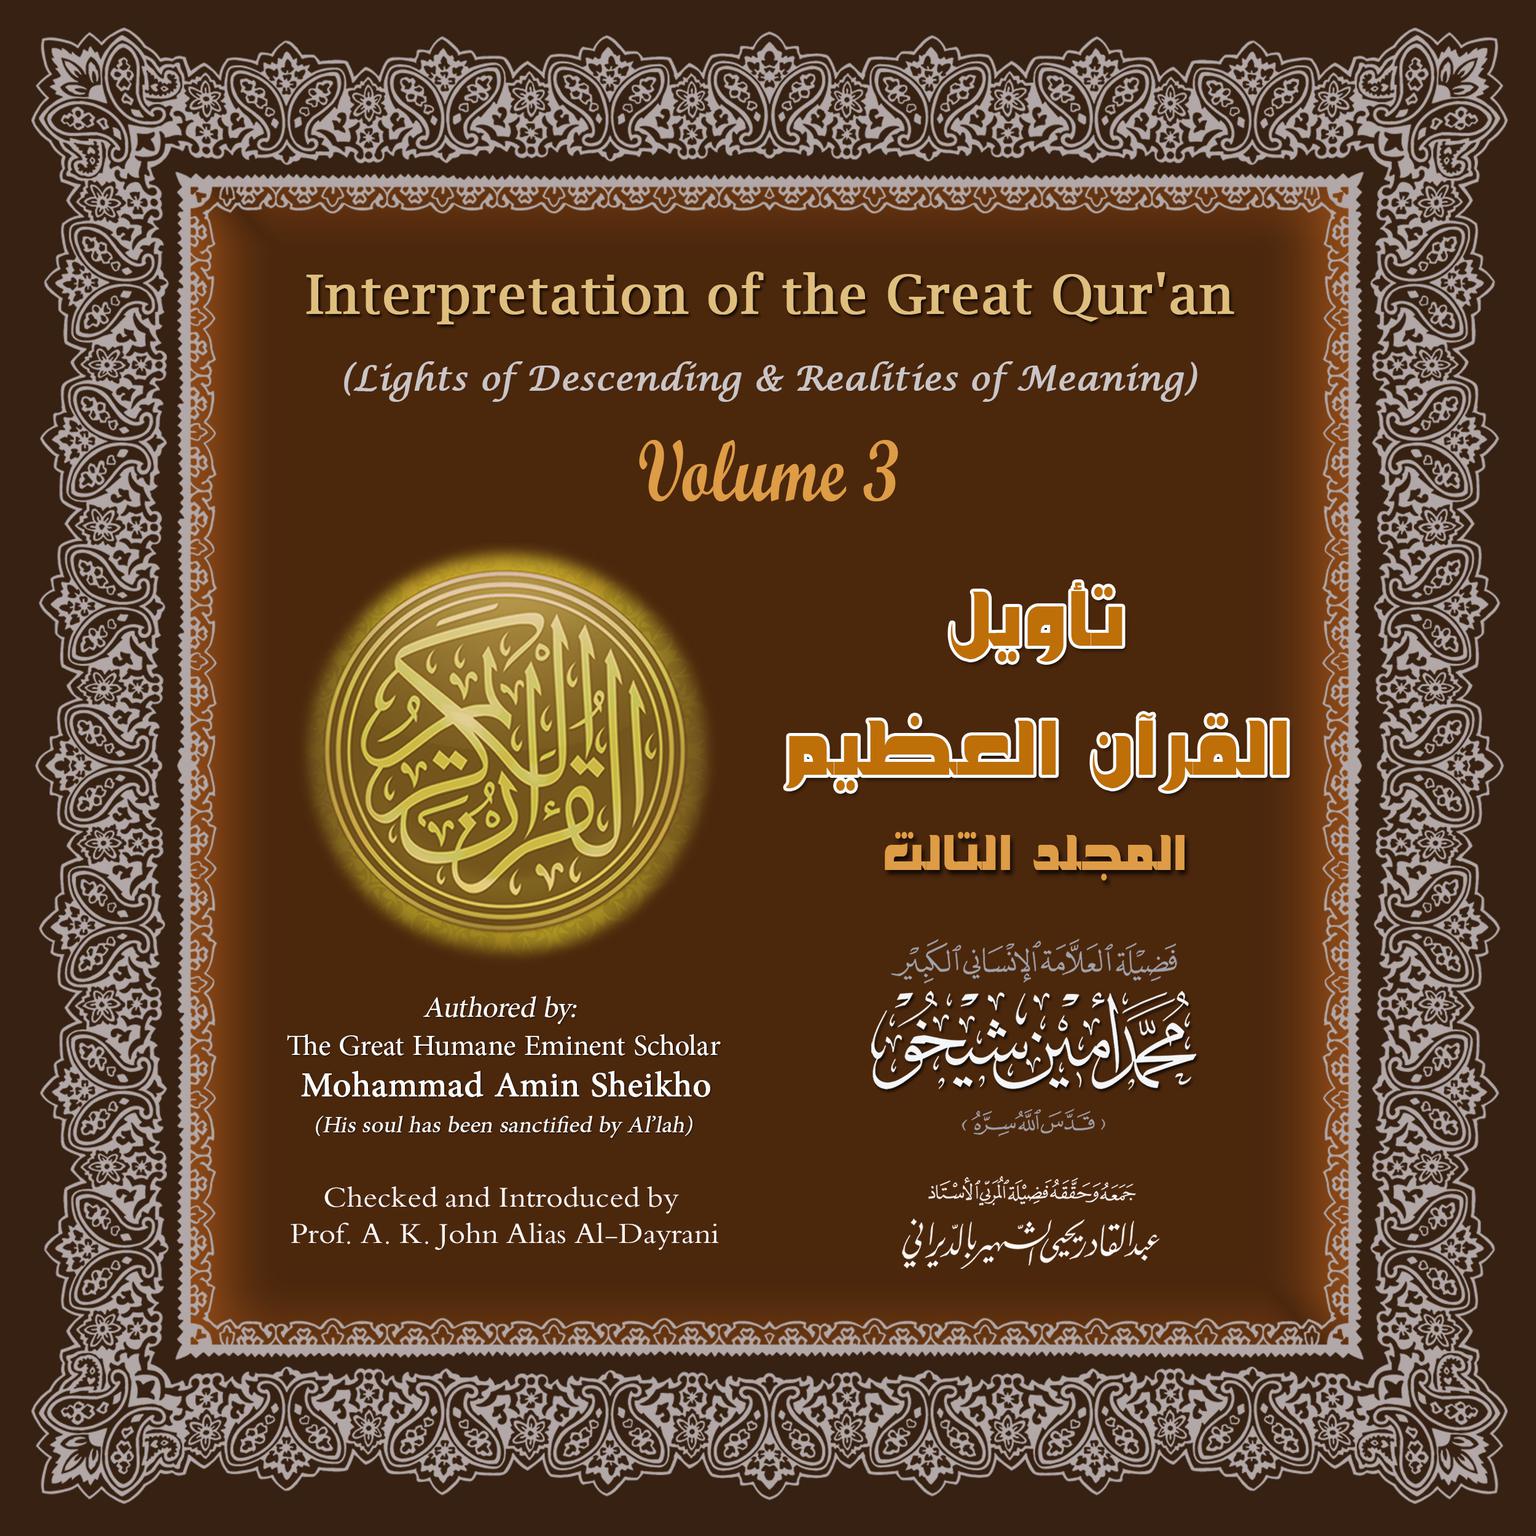 Interpretation of the Great Quran: Volume 3 Audiobook, by Mohammad Amin Sheikho